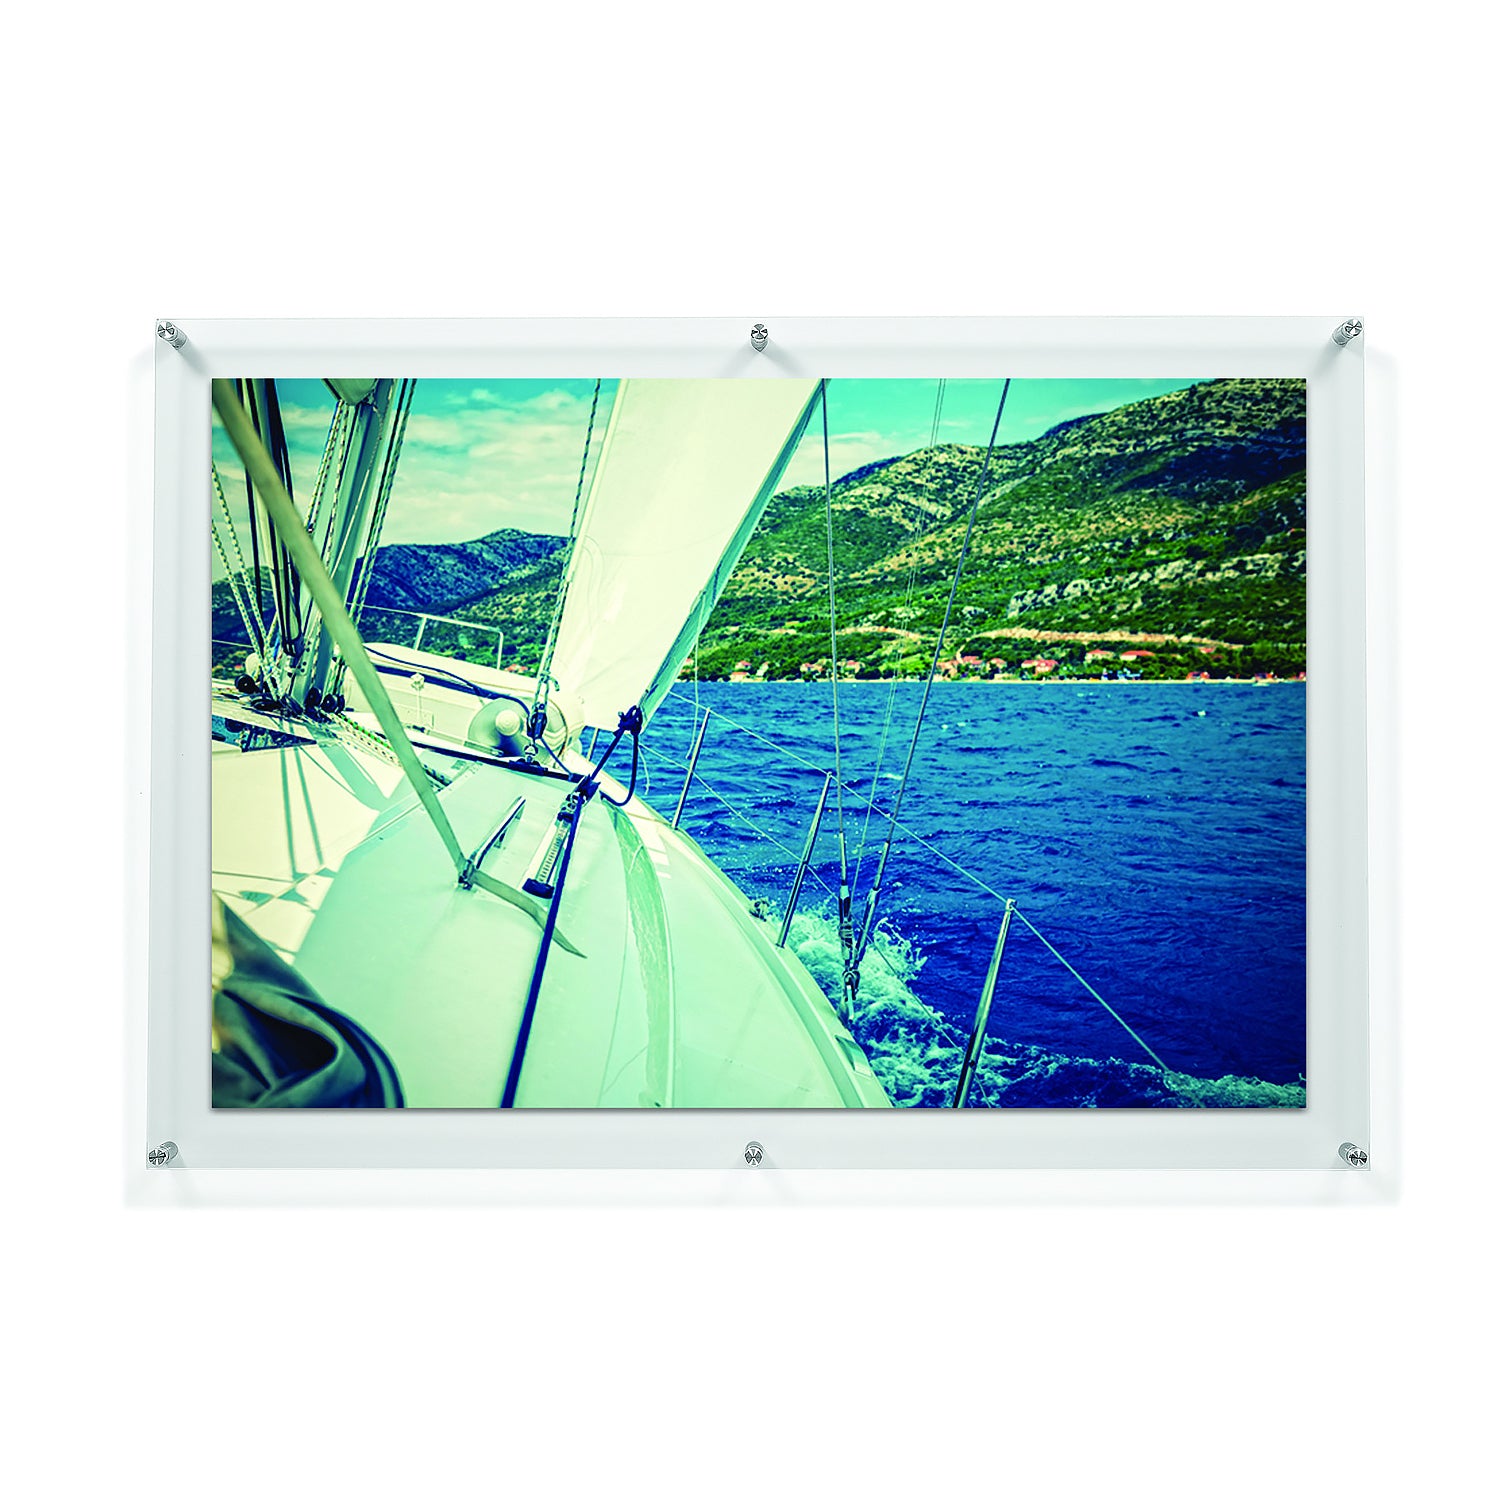 24x36" Photo Floating Acrylic Clear Picture Frame (Frame Size 28x40")